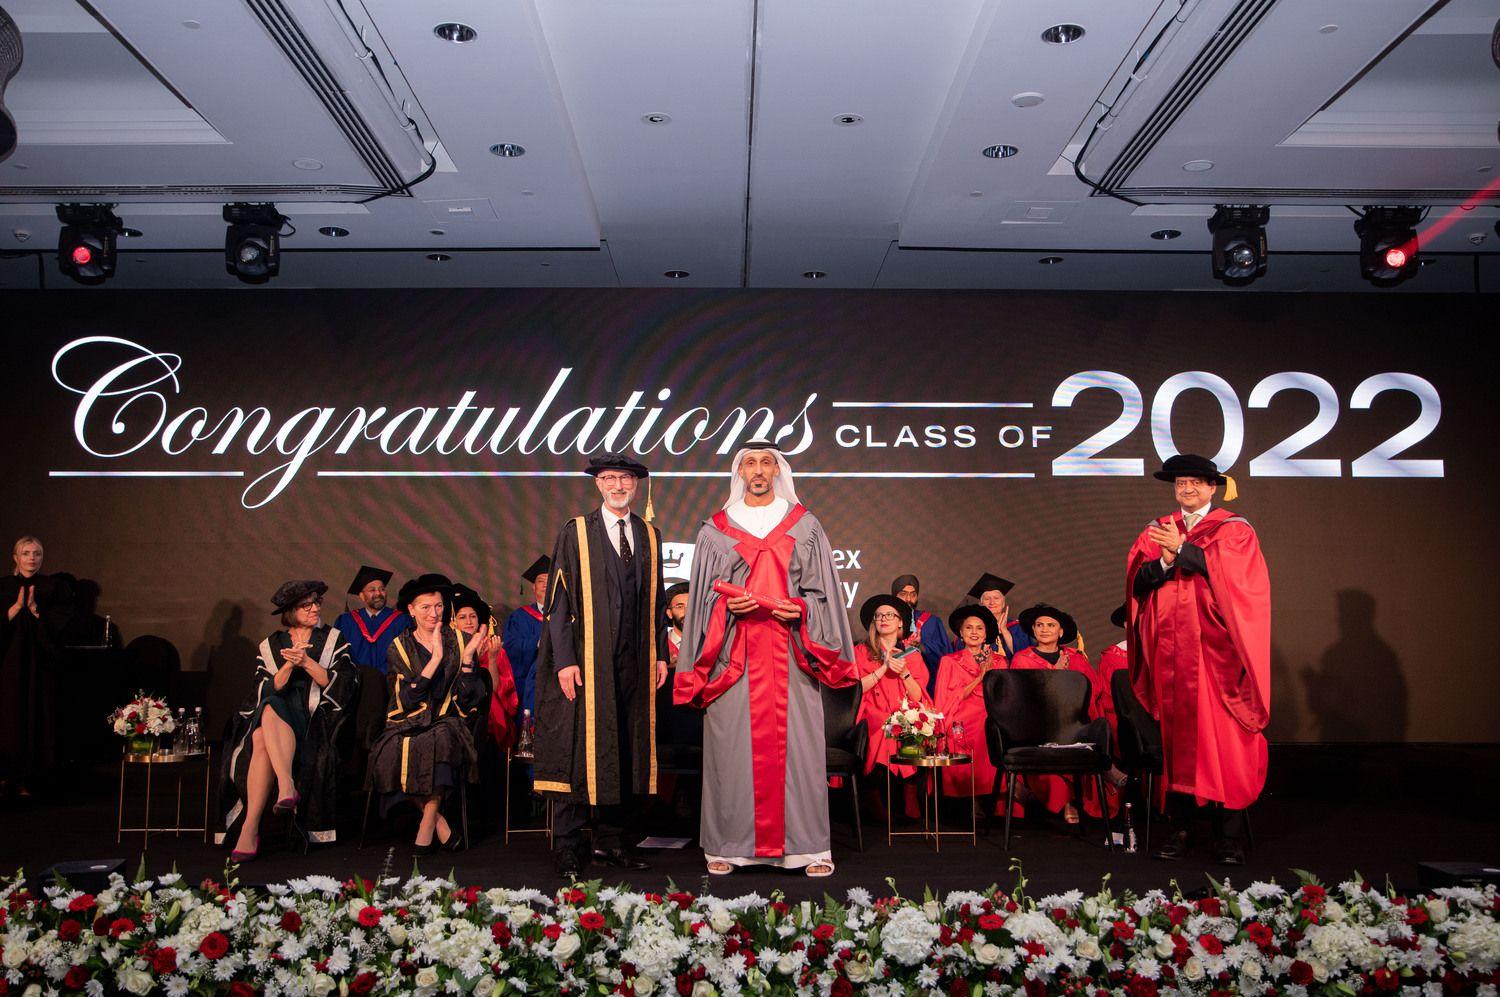 His Excellency (H.E.) Khalfan Juma Belhoul, Chief Executive Officer of the Dubai Future Foundation, advised the graduating class of Dubai’s top British university to embrace challenges of the future, reimagine the impossible, and invent and innovate for the future.